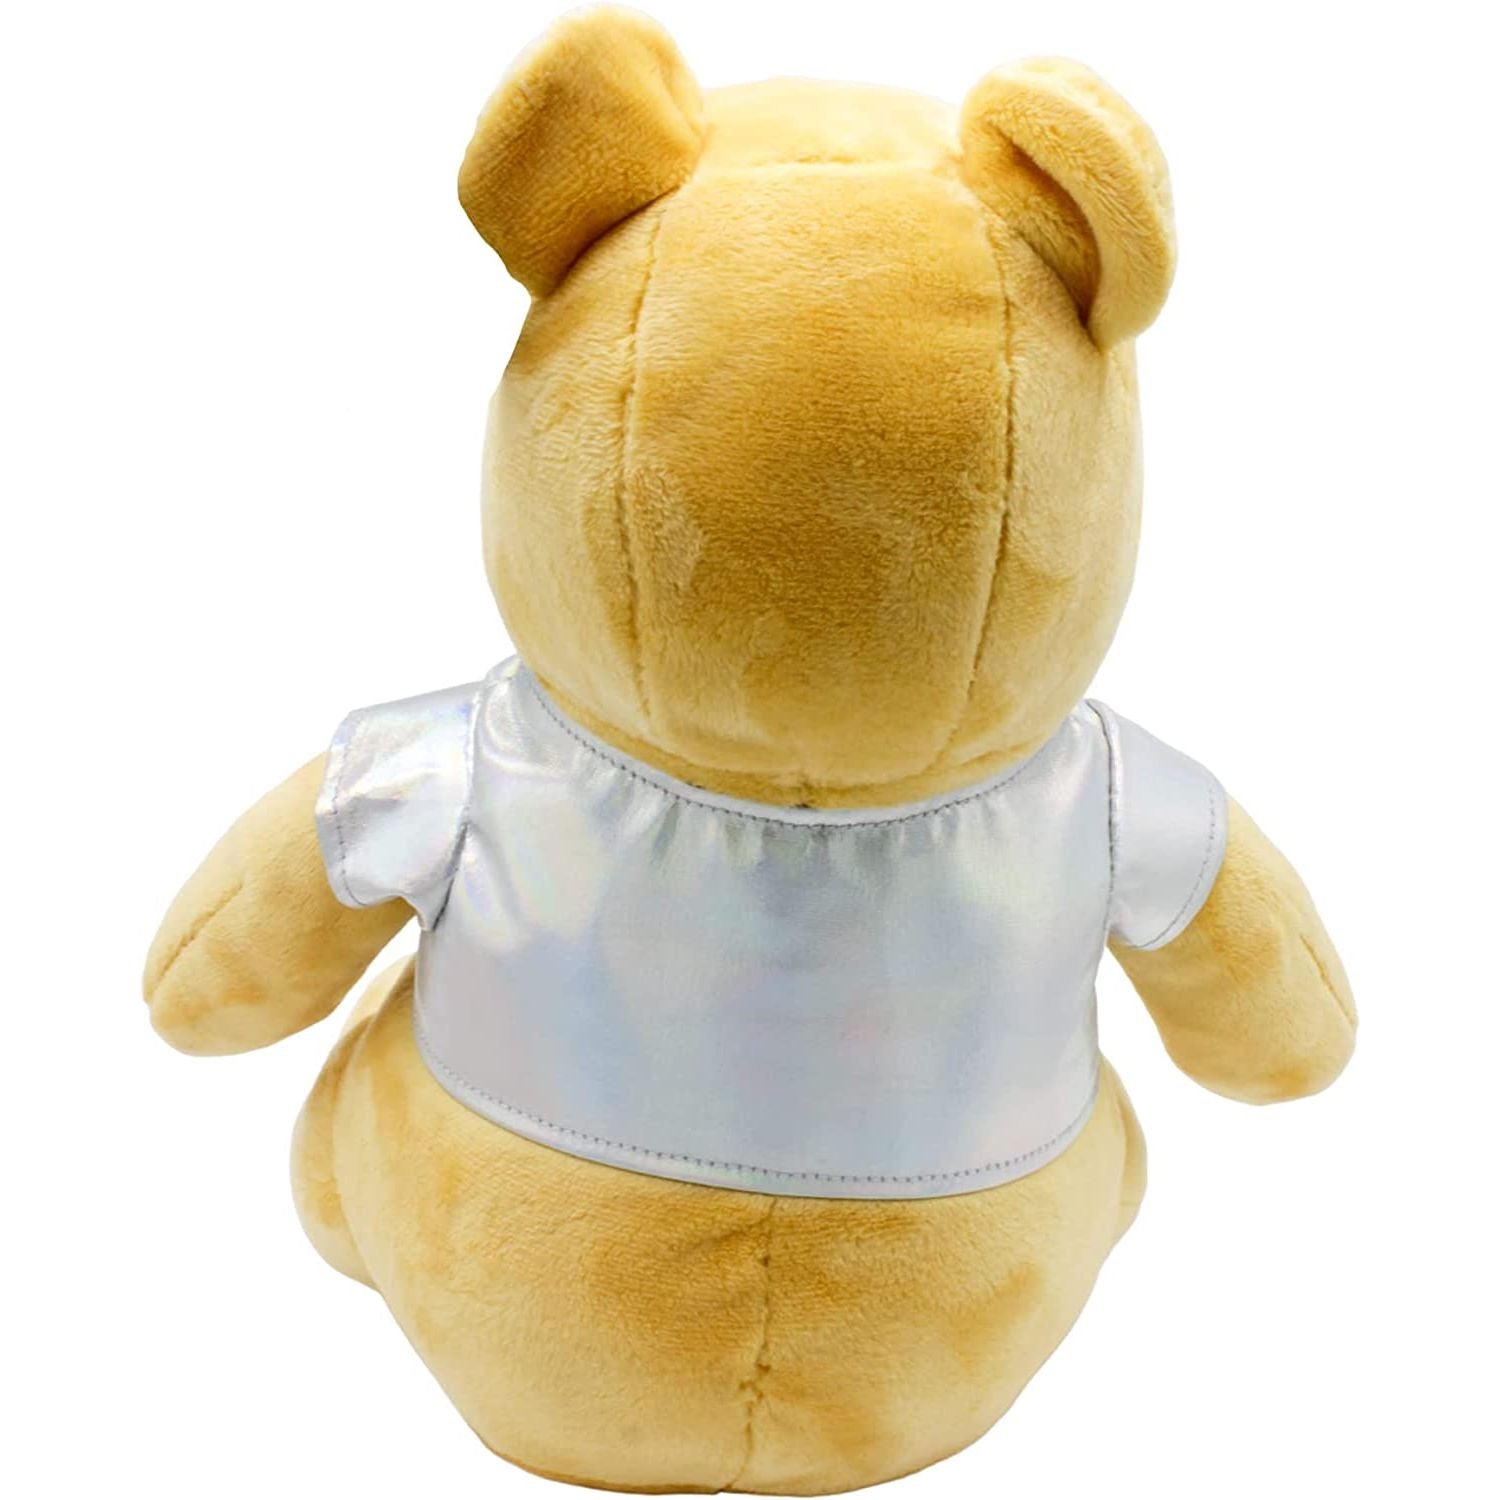 Disney - 100th Celebration - Exclusive Winnie The Pooh 14In Push Toy - Heretoserveyou